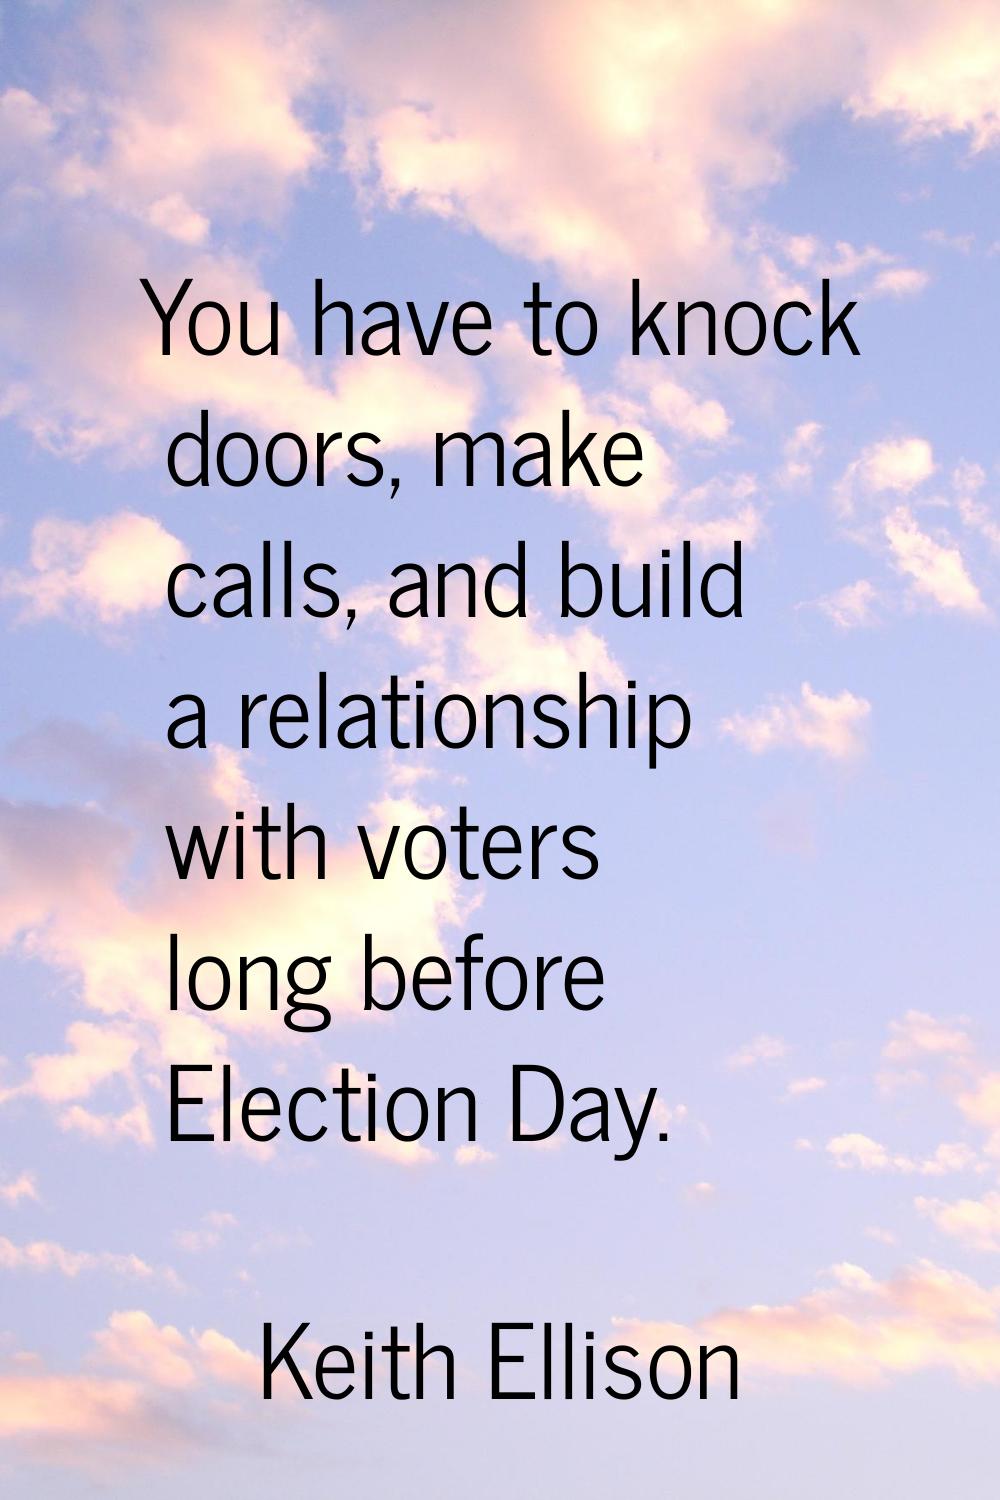 You have to knock doors, make calls, and build a relationship with voters long before Election Day.